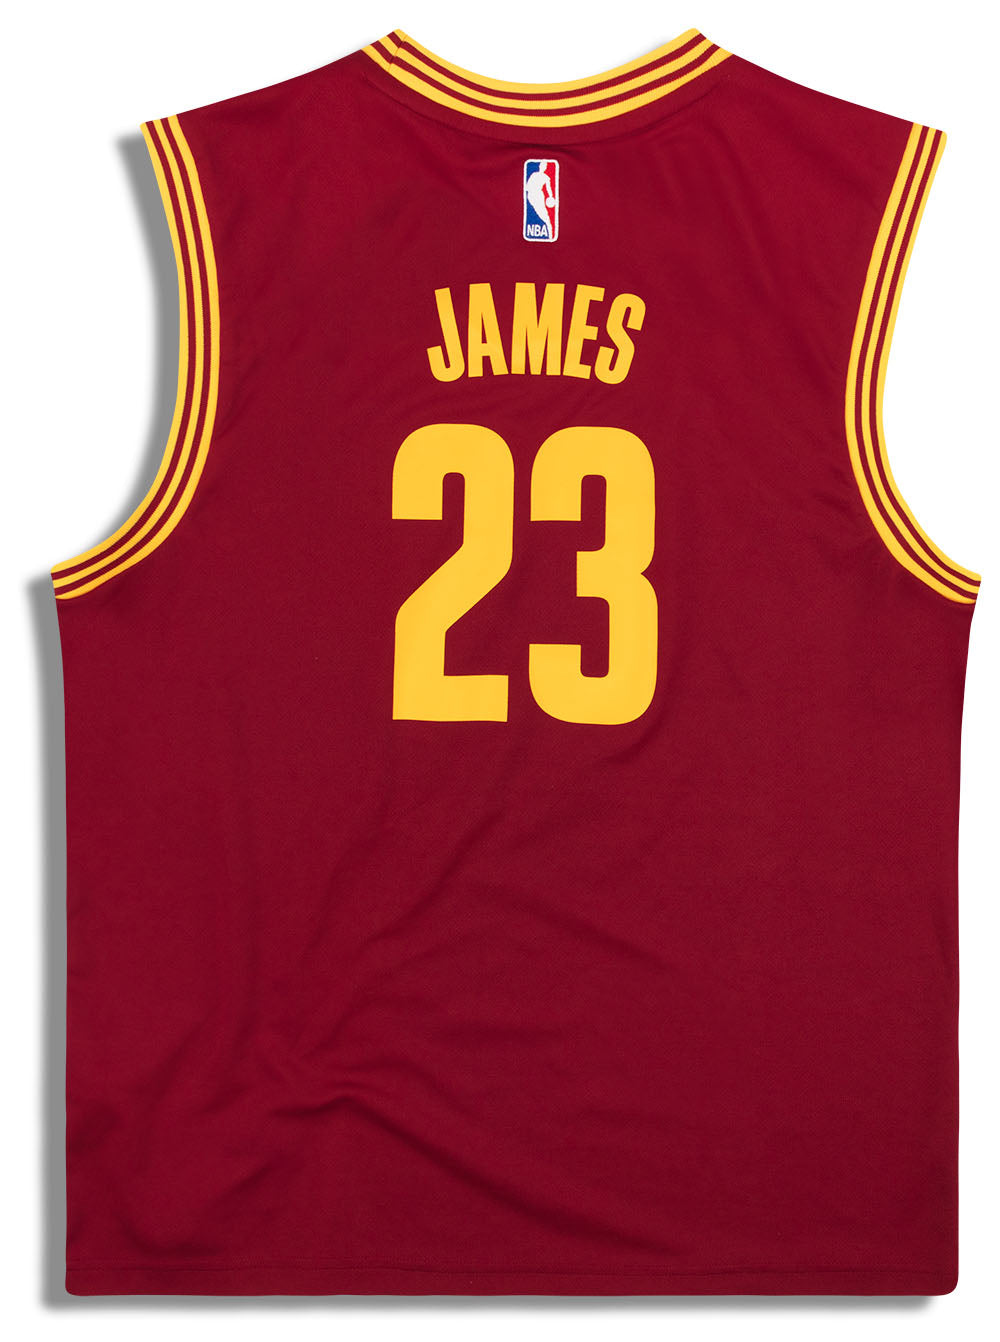 2014-17 CLEVELAND CAVALIERS JAMES #23 ADIDAS JERSEY (AWAY) Y